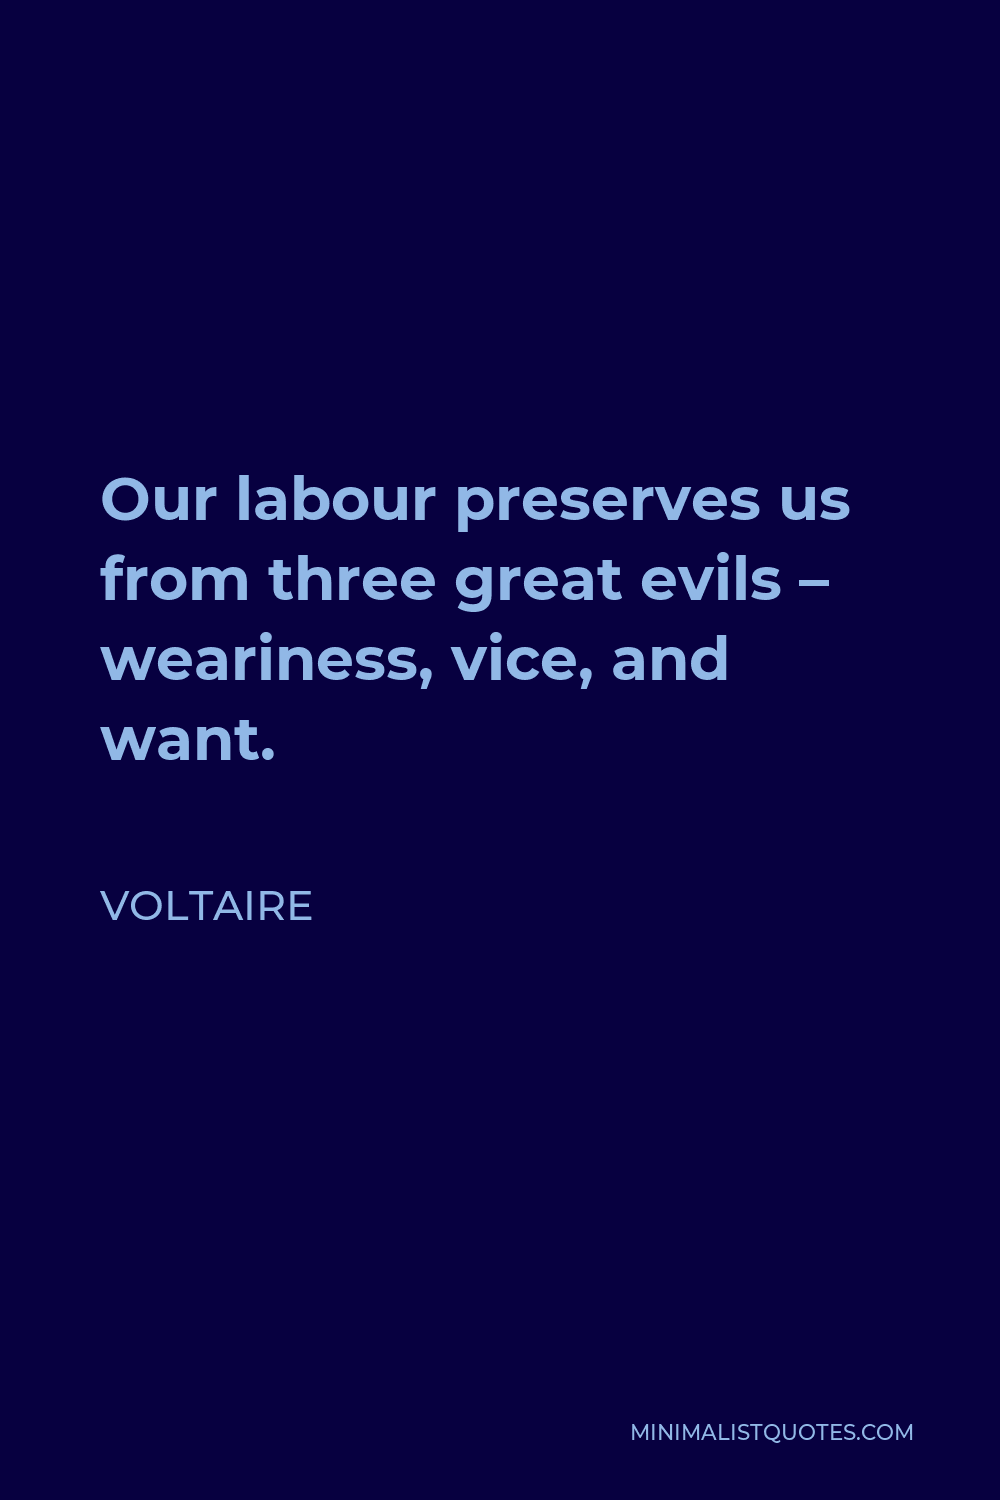 Voltaire Quote - Our labour preserves us from three great evils – weariness, vice, and want.